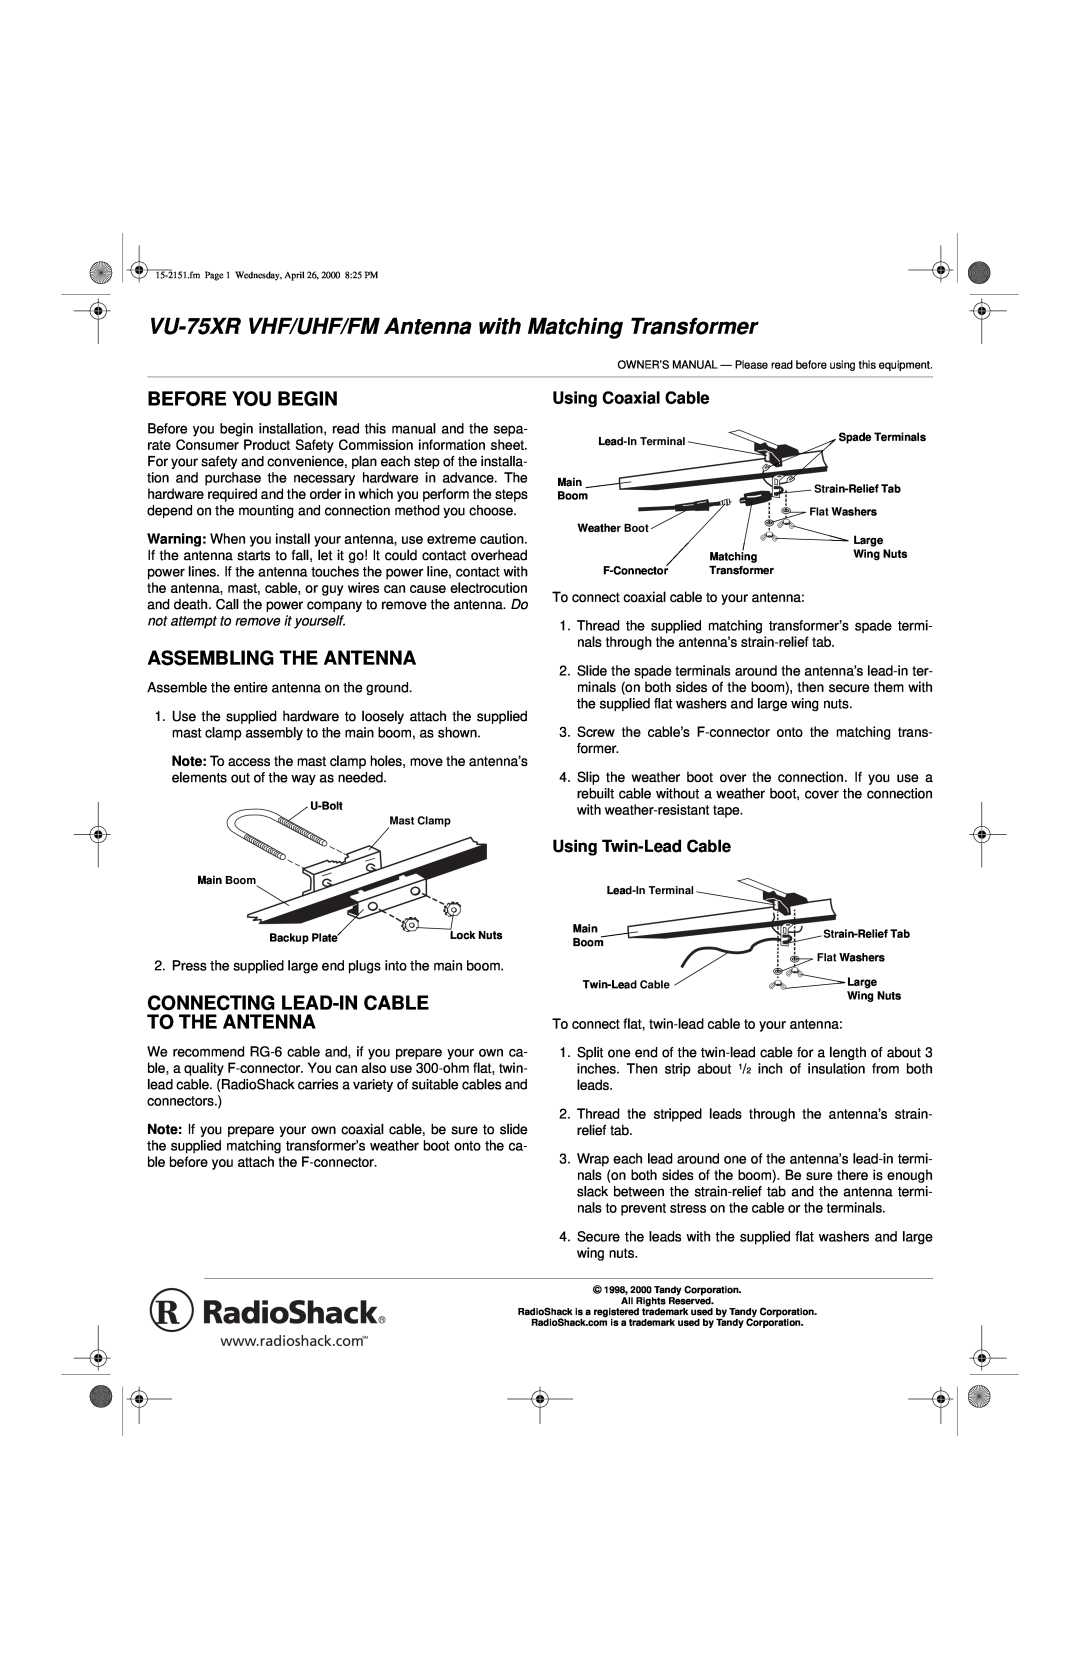 Radio Shack VU-75XR owner manual Before You Begin, Assembling The Antenna, Connecting Lead-In Cable To The Antenna 